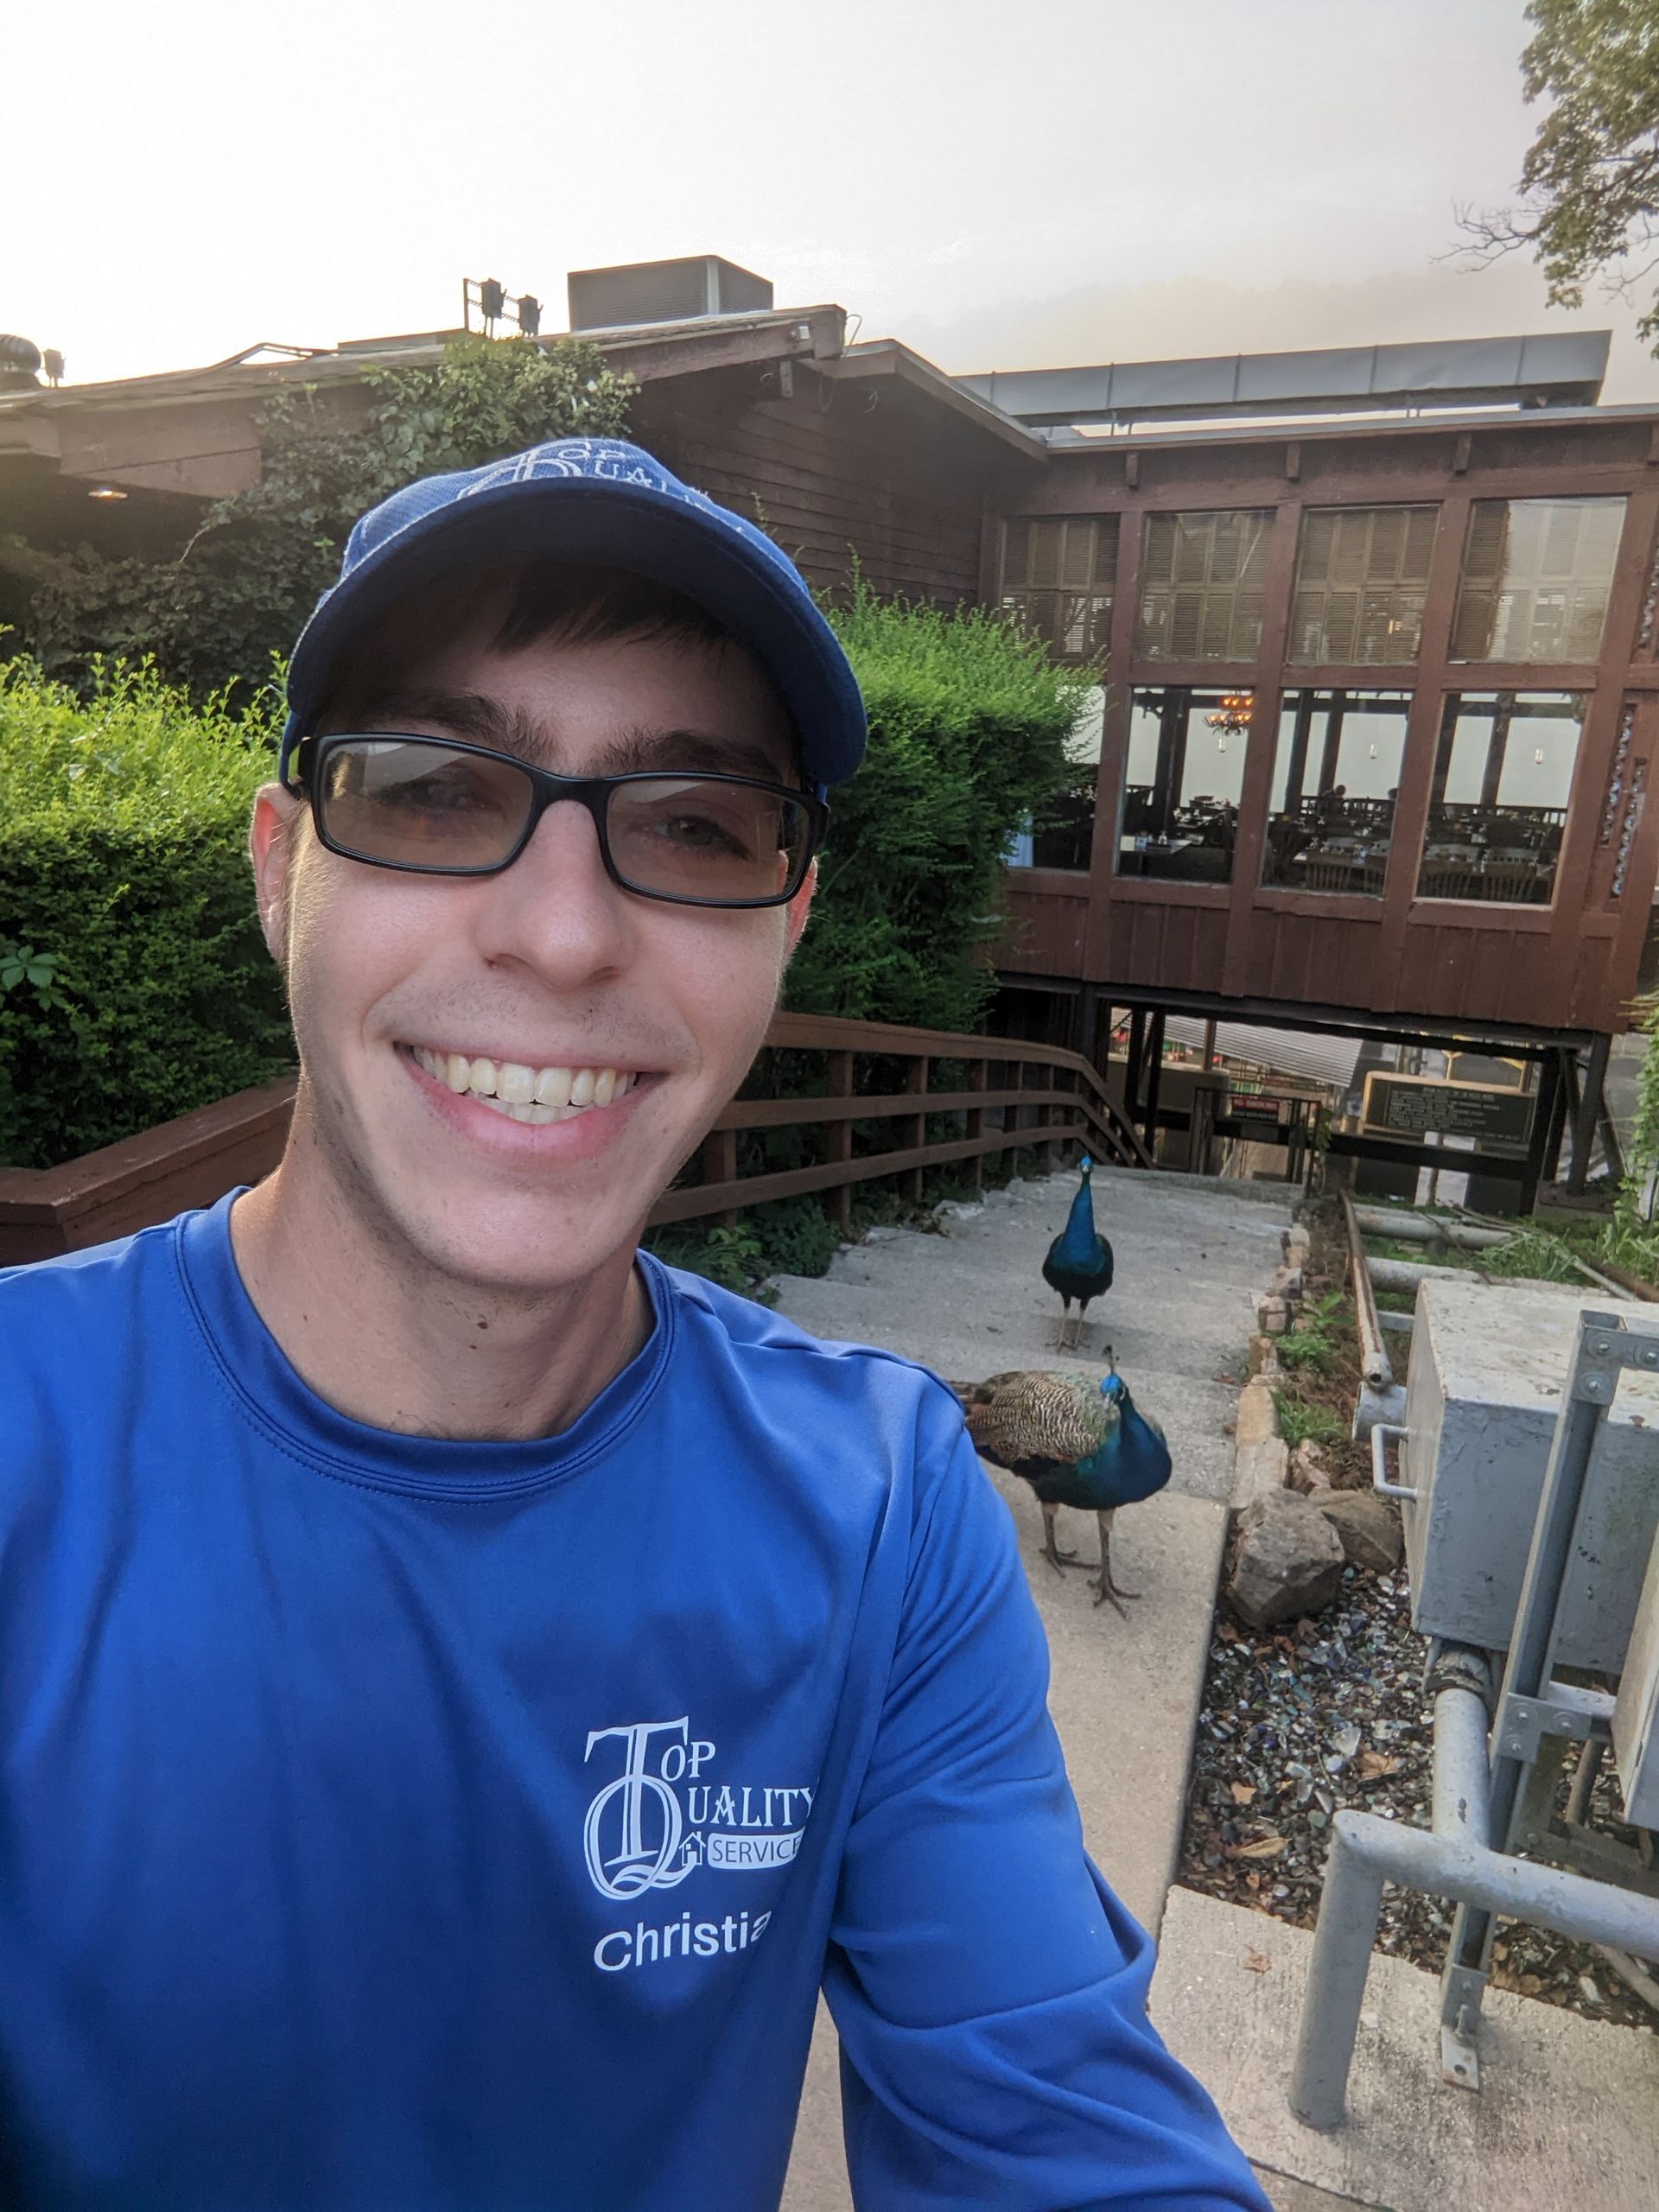 A man in a blue shirt is taking a selfie with a peacock in the background.